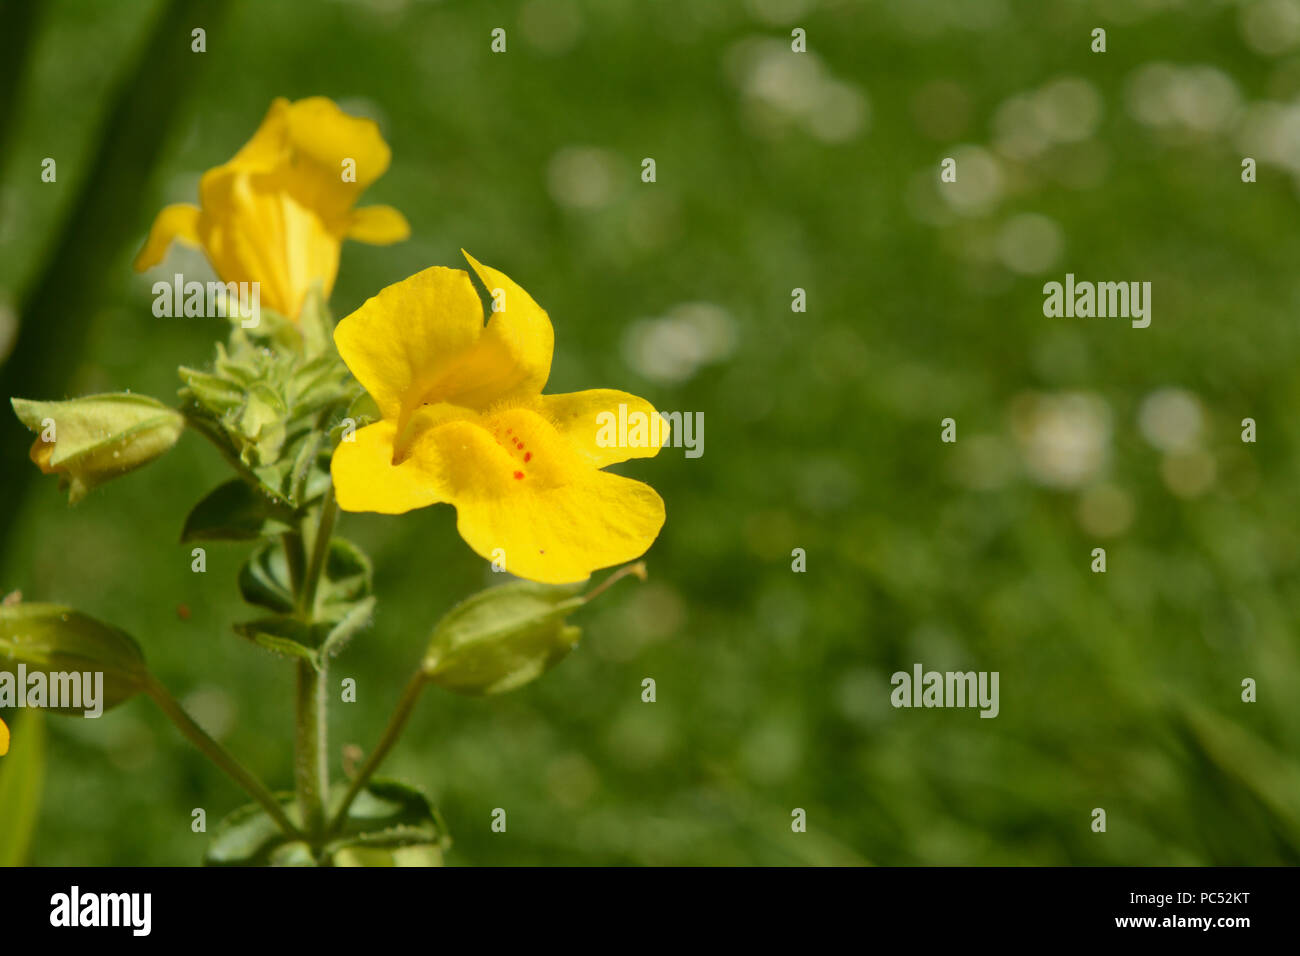 Single yellow mimulus flower with red spots against background of green grass with copy space Stock Photo